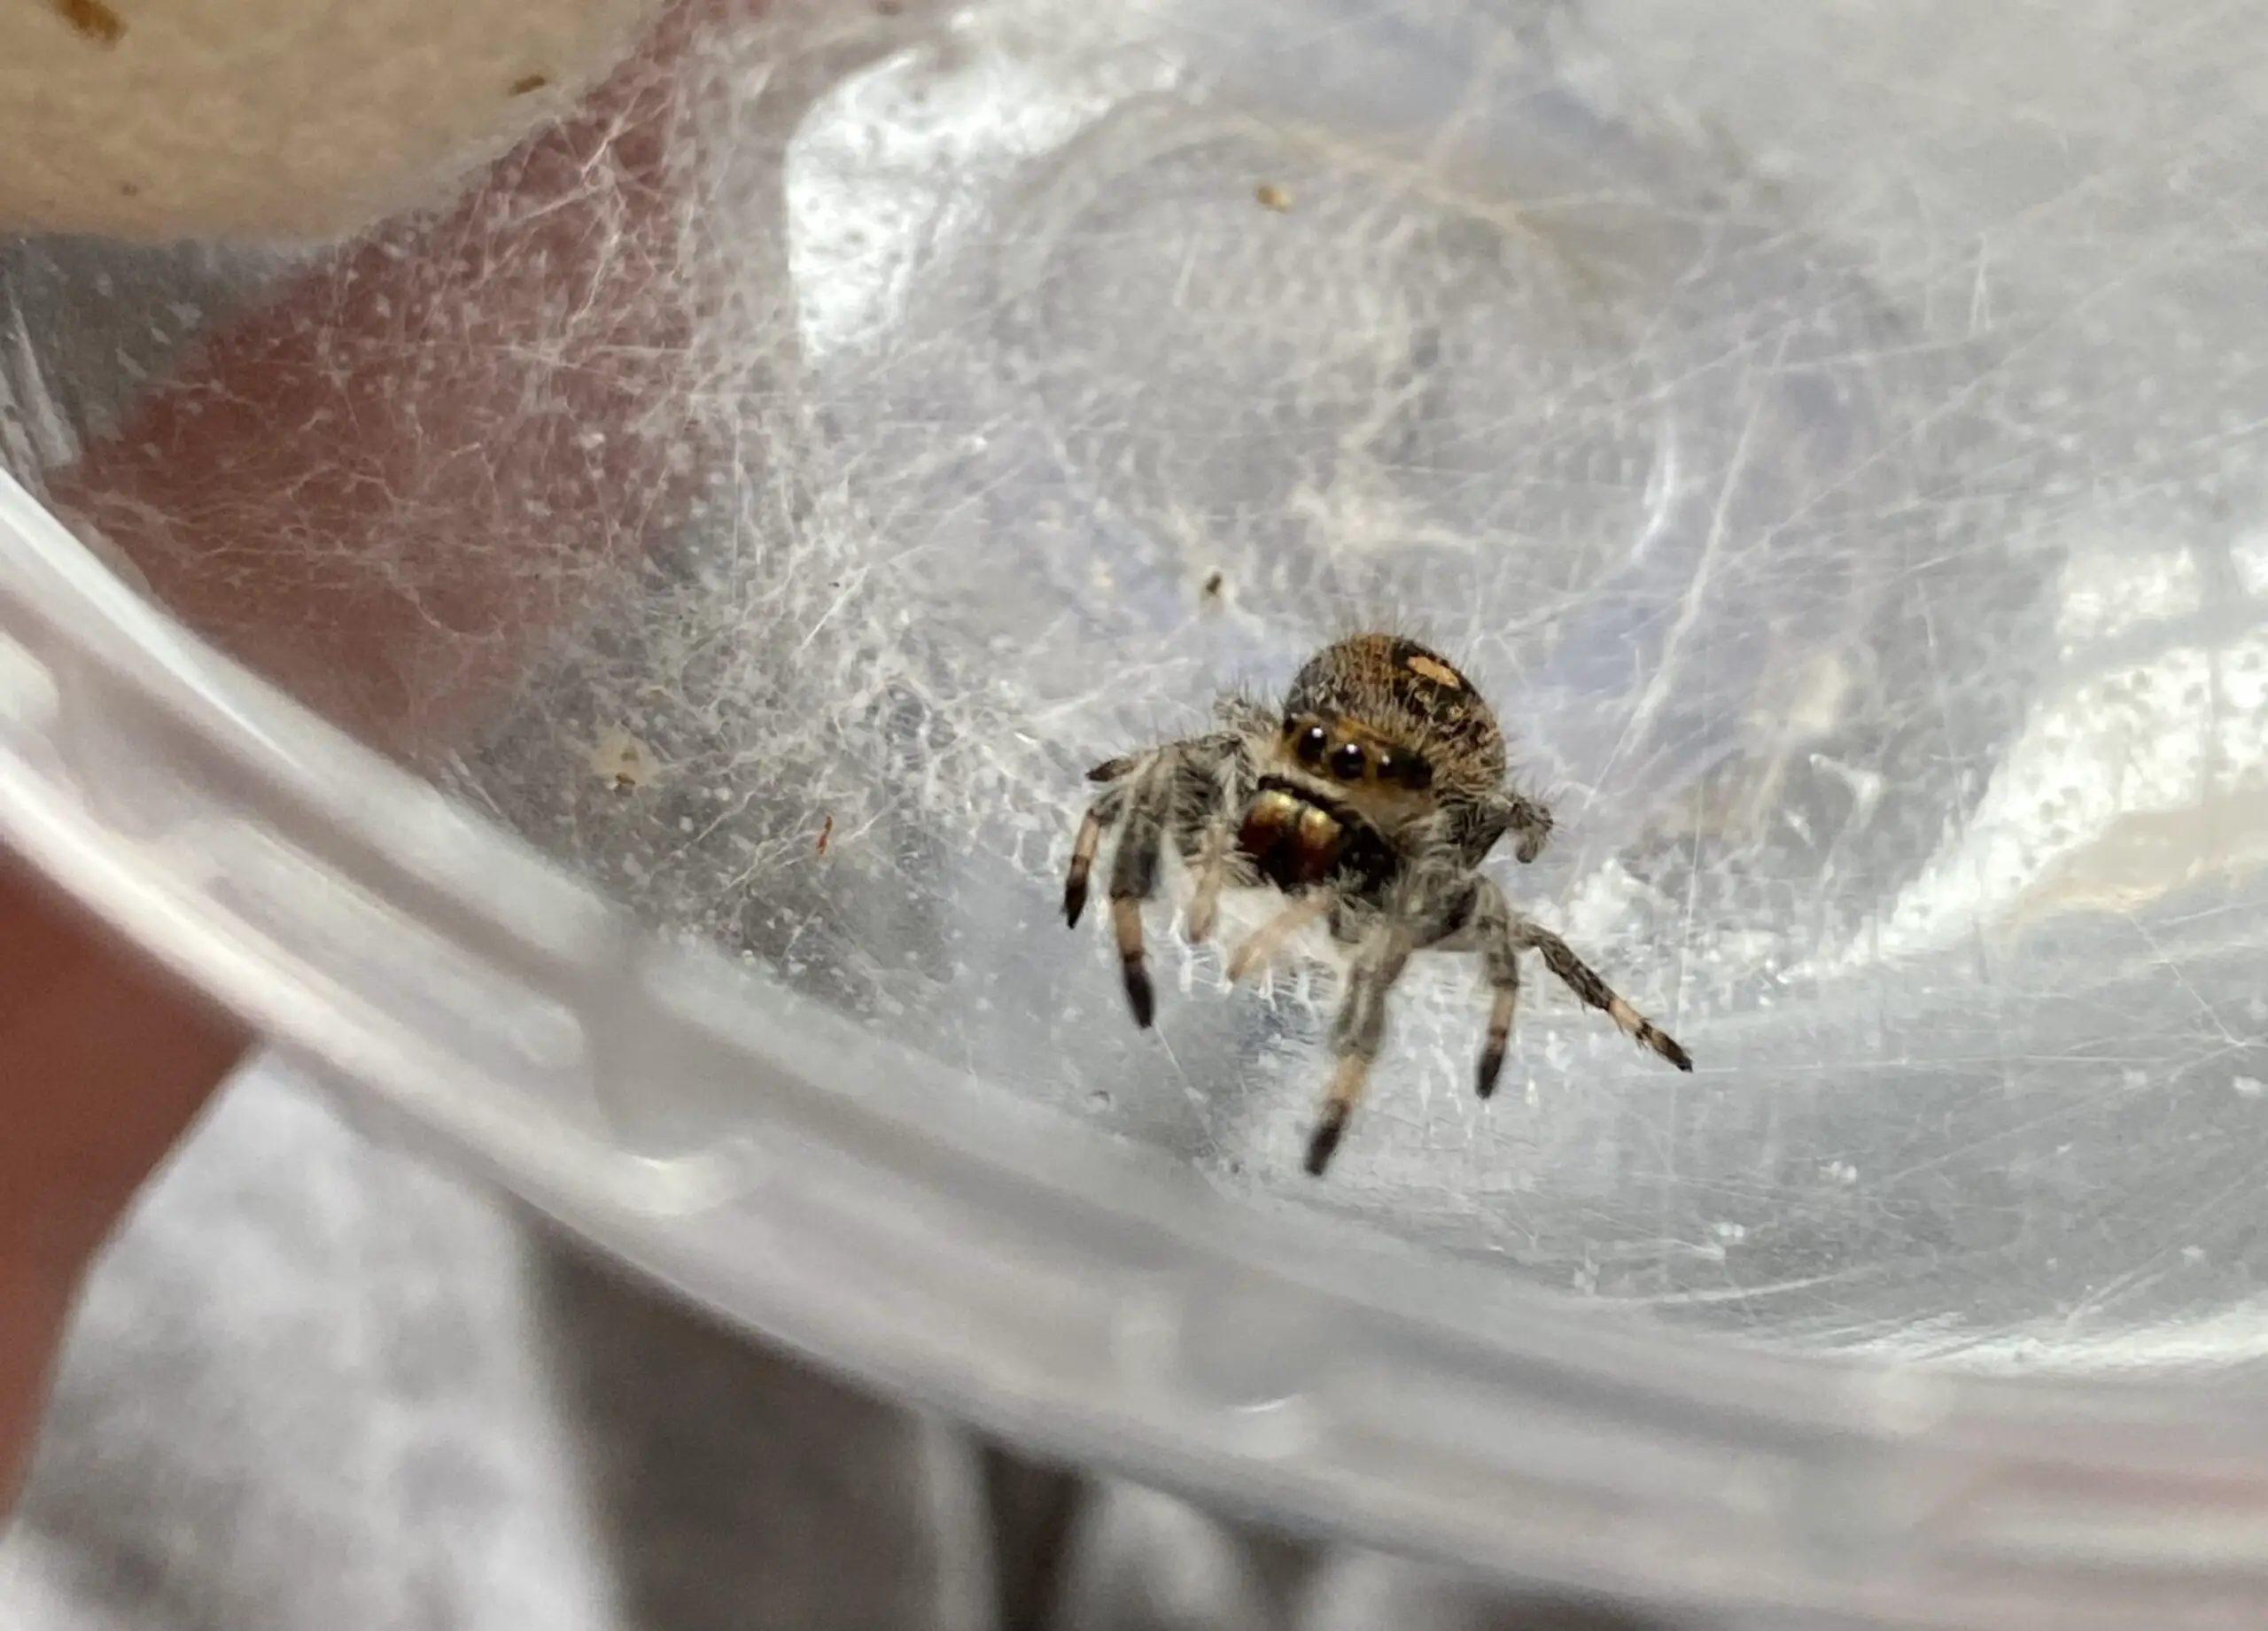 jumping spider observing